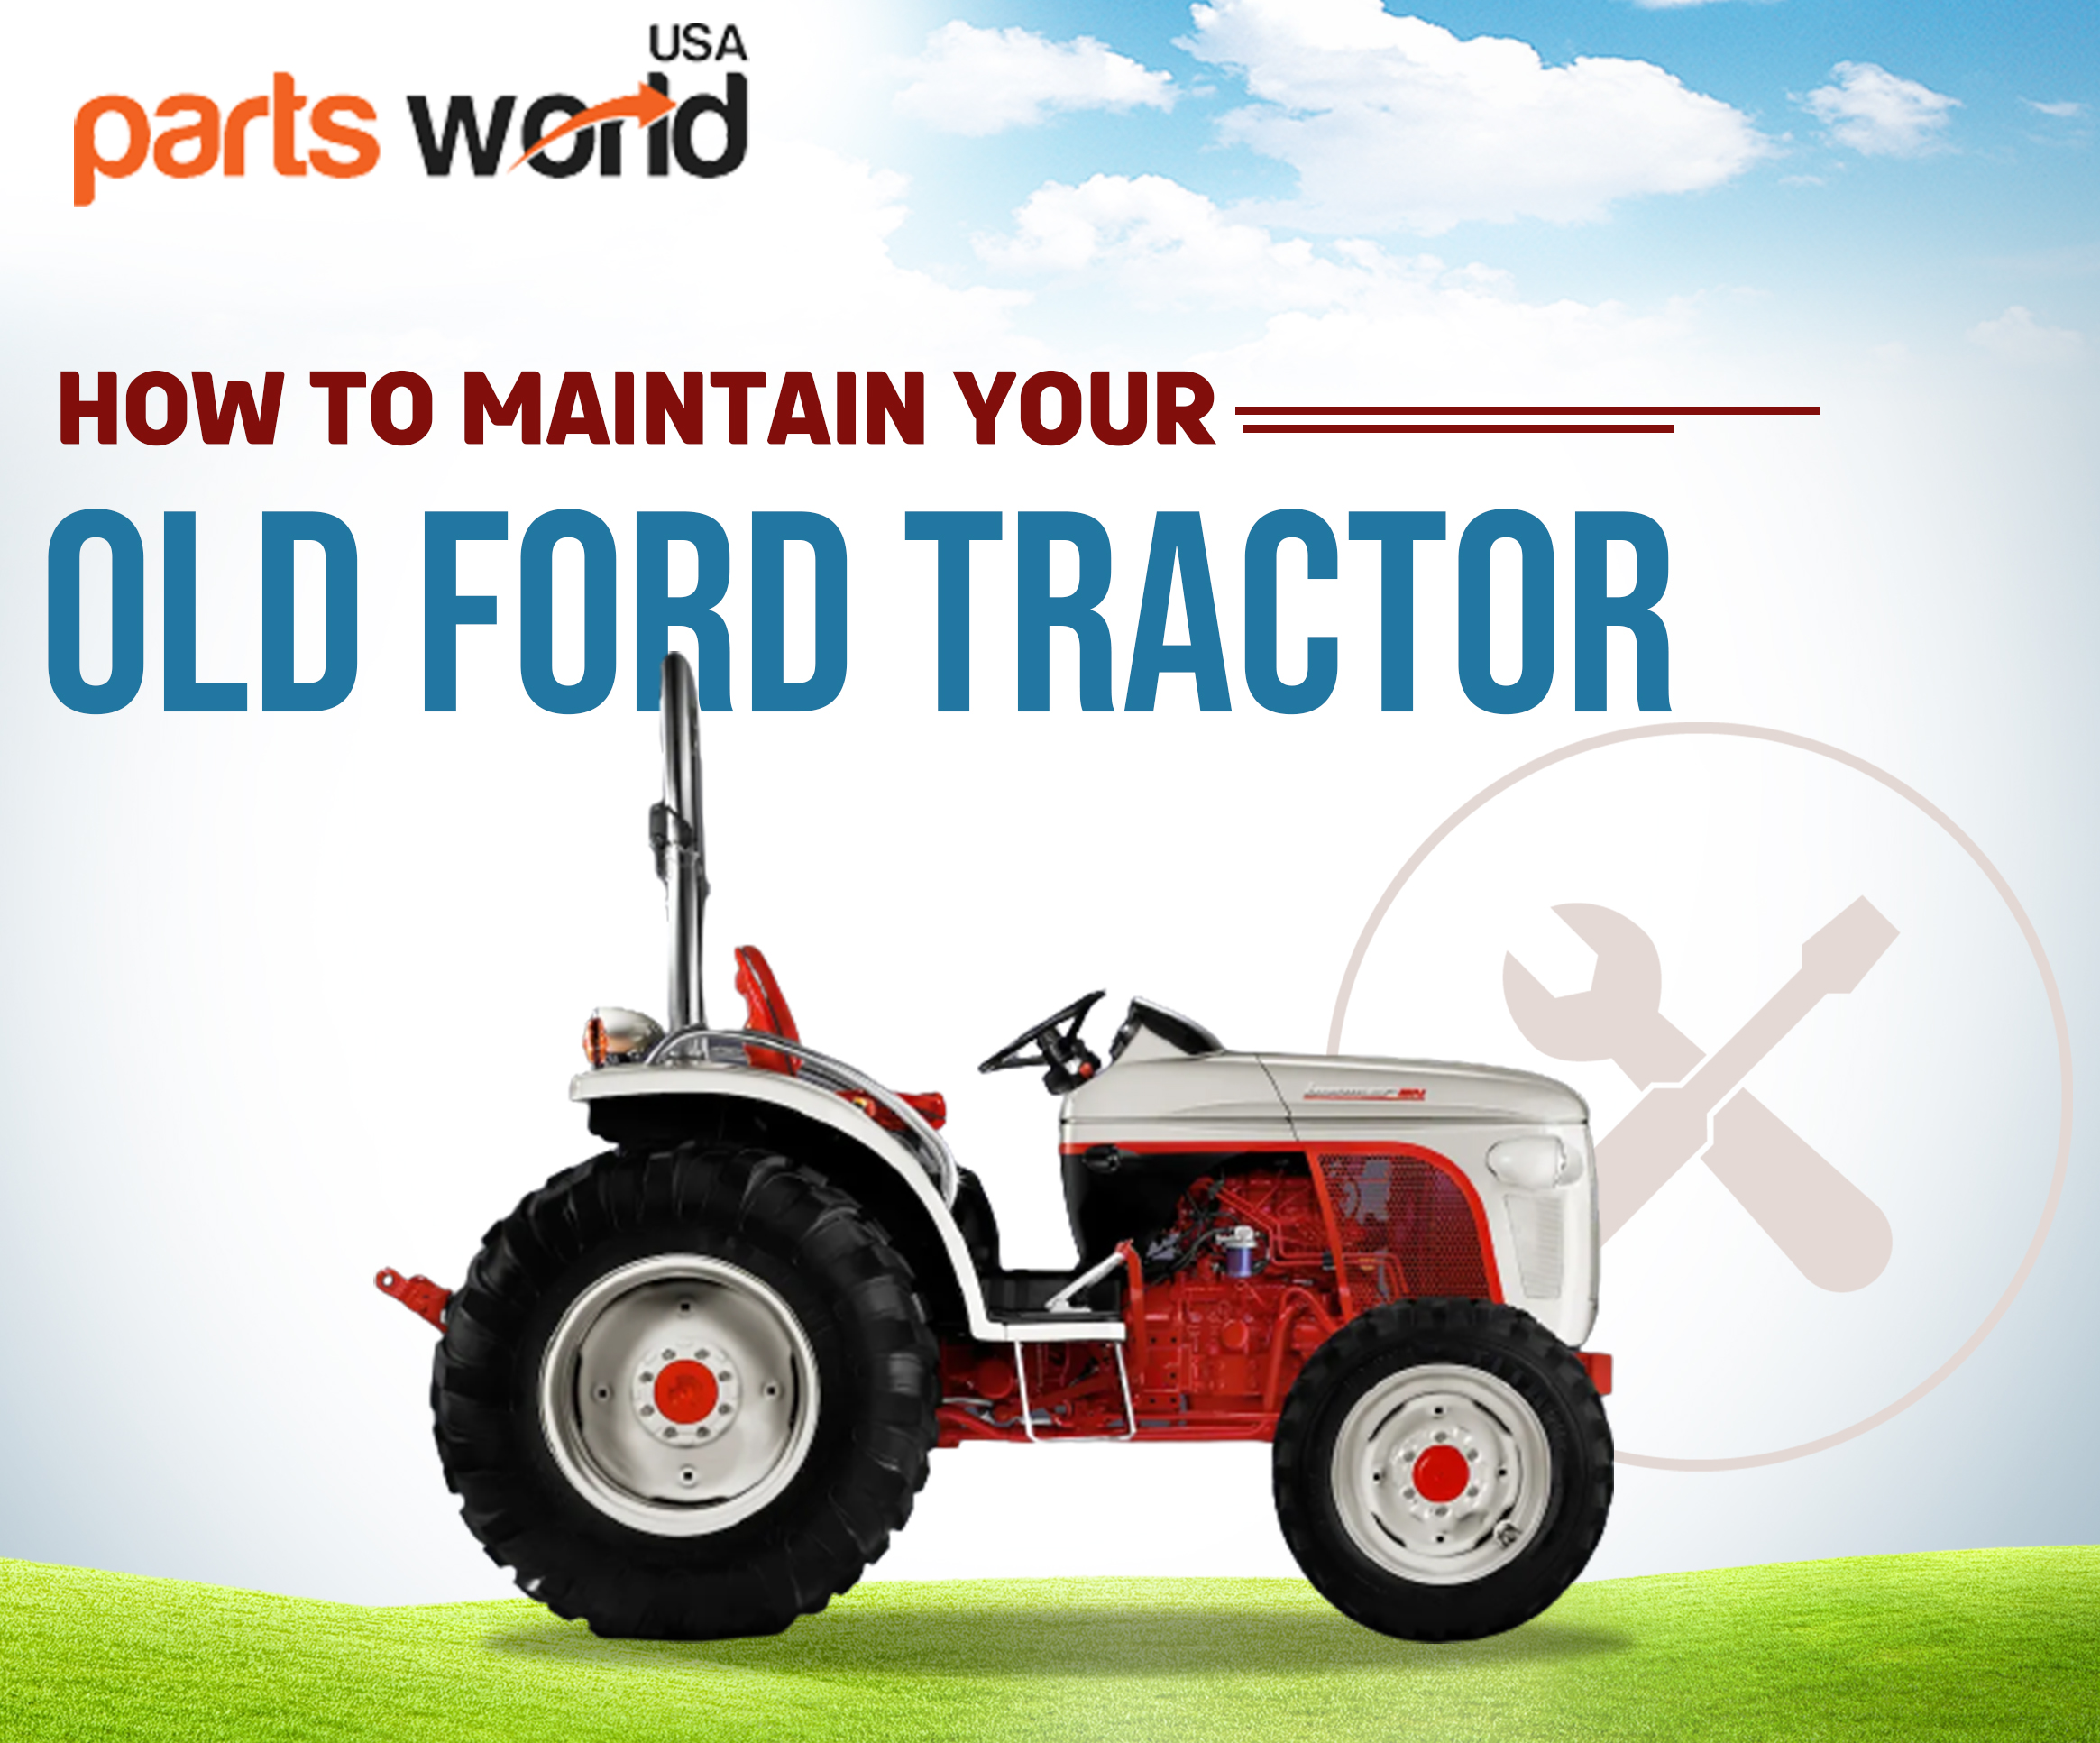 How to Maintain Your Old Ford Tractor